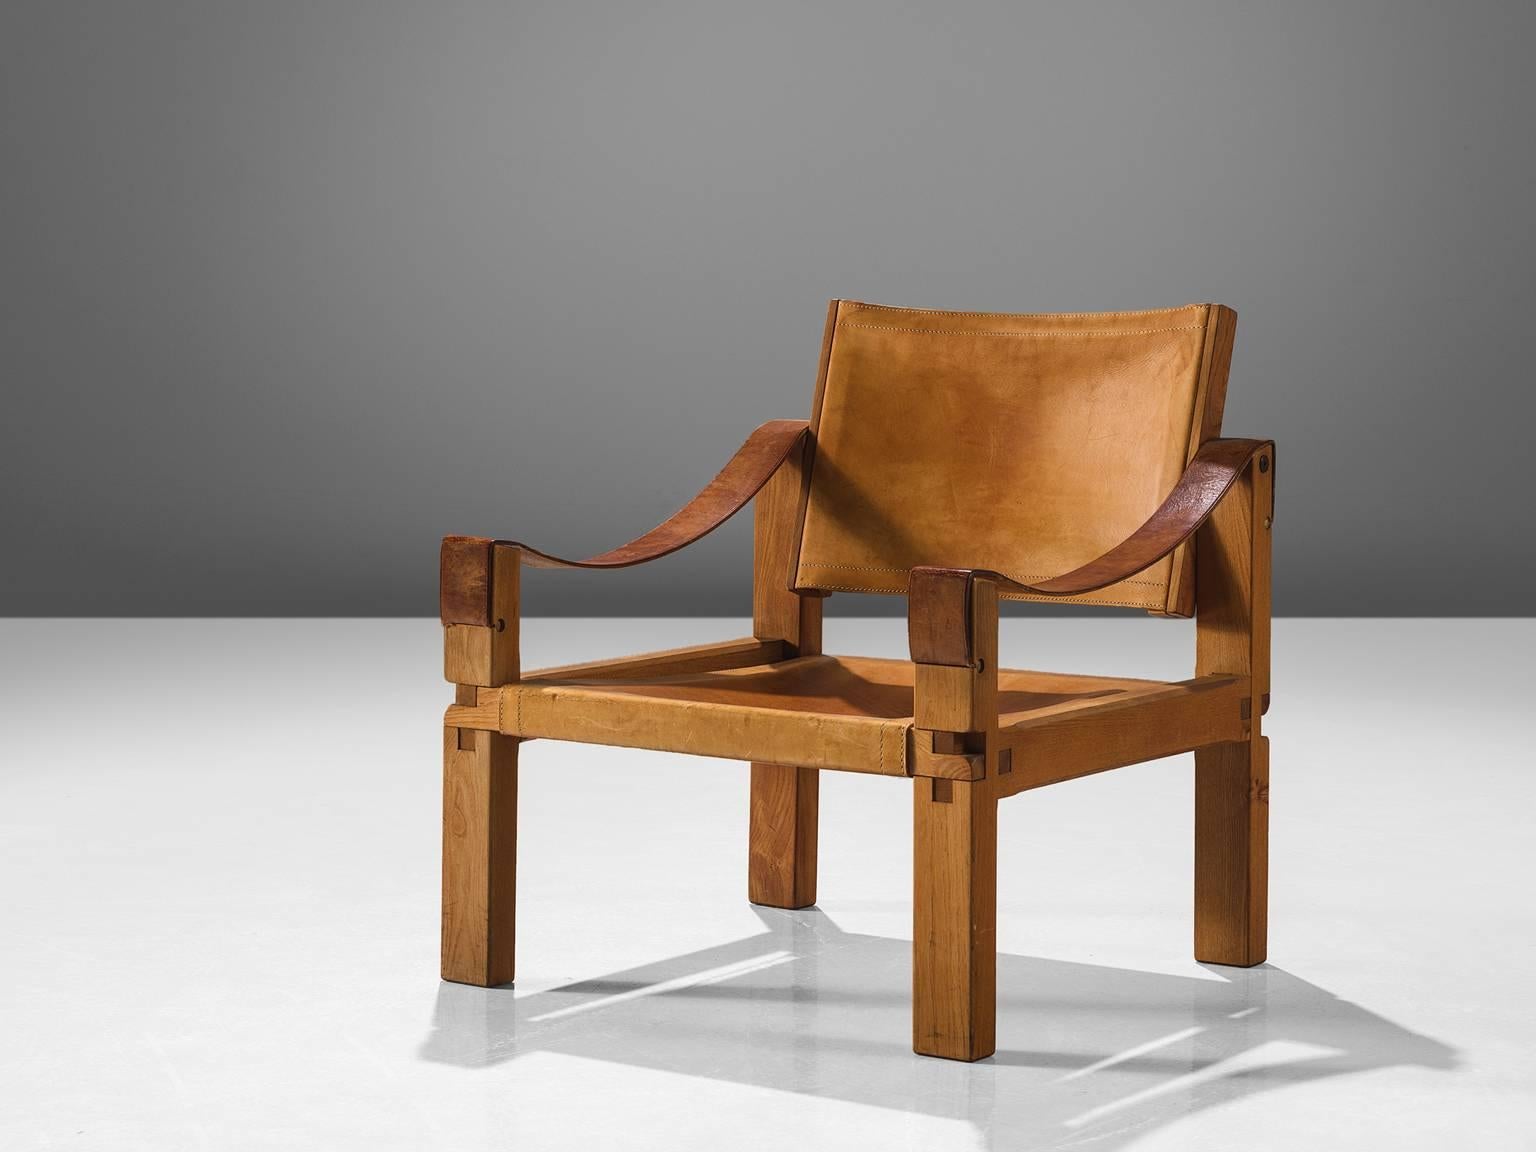 Pierre Chapo, S10X lounge chair, elm and leather, France, 1960s.

This lounge chair is designed by Pierre Chapo. The chair is based on Chapo's 48 x 72 assembly principle. The S10 chair is most likely a reference to Corbusier's LC2. It was a very